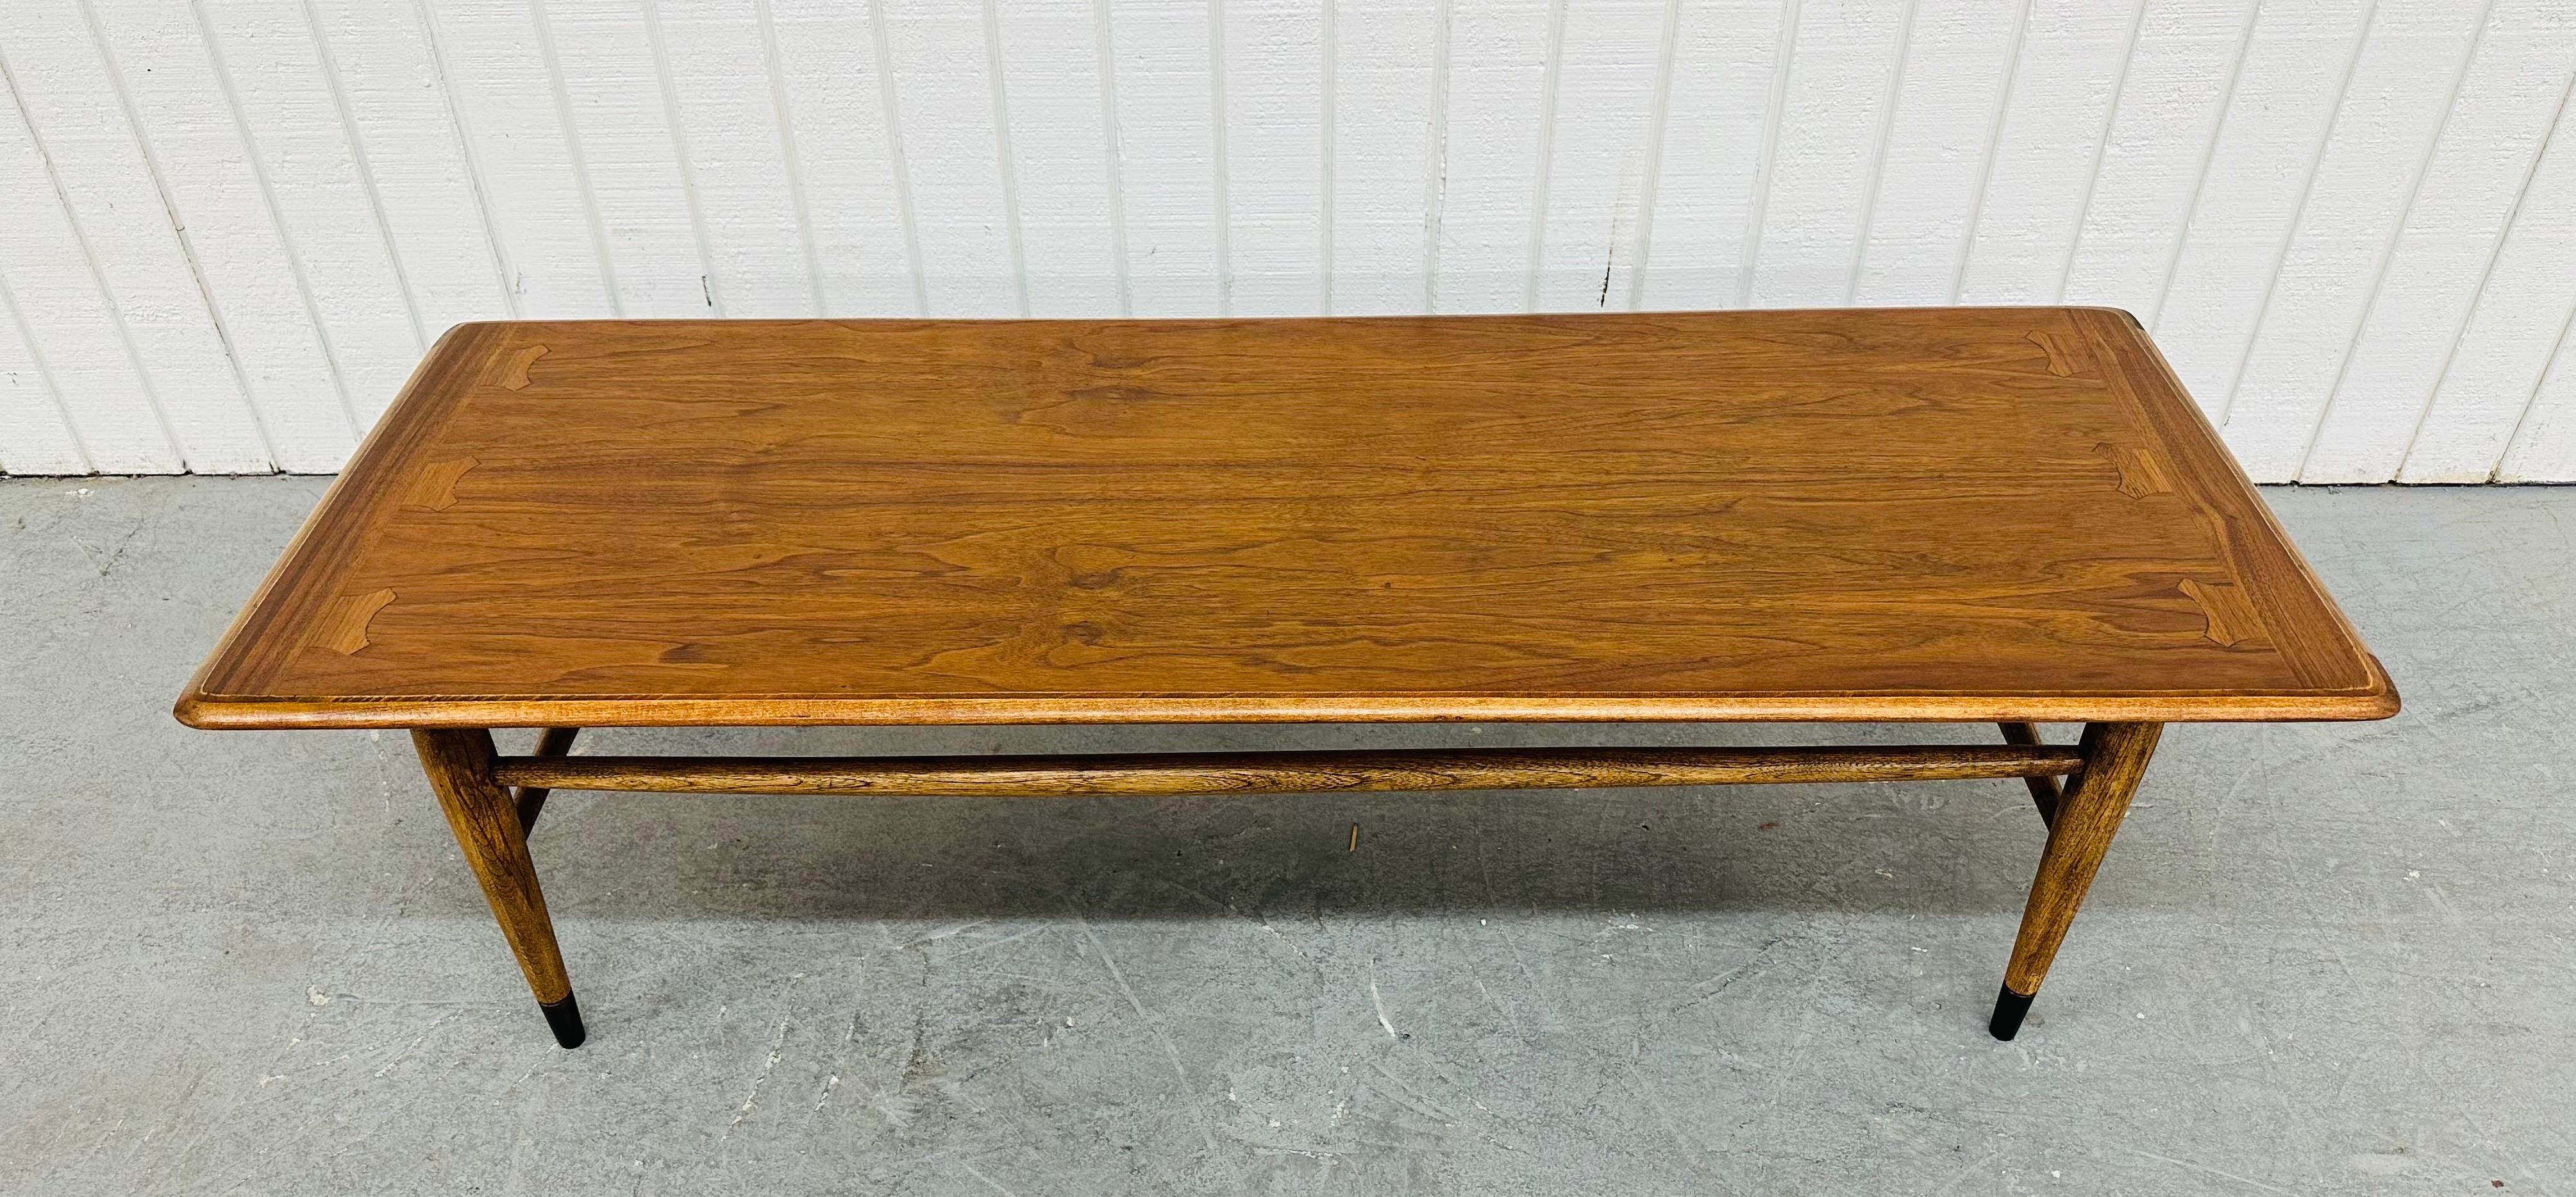 This listing is for a Mid-Century Modern Lane Style Walnut Coffee Table. Featuring a straight line design, rectangular top, modern legs with stretchers, and a beautiful walnut finish. This is an exceptional combination of quality and design in the